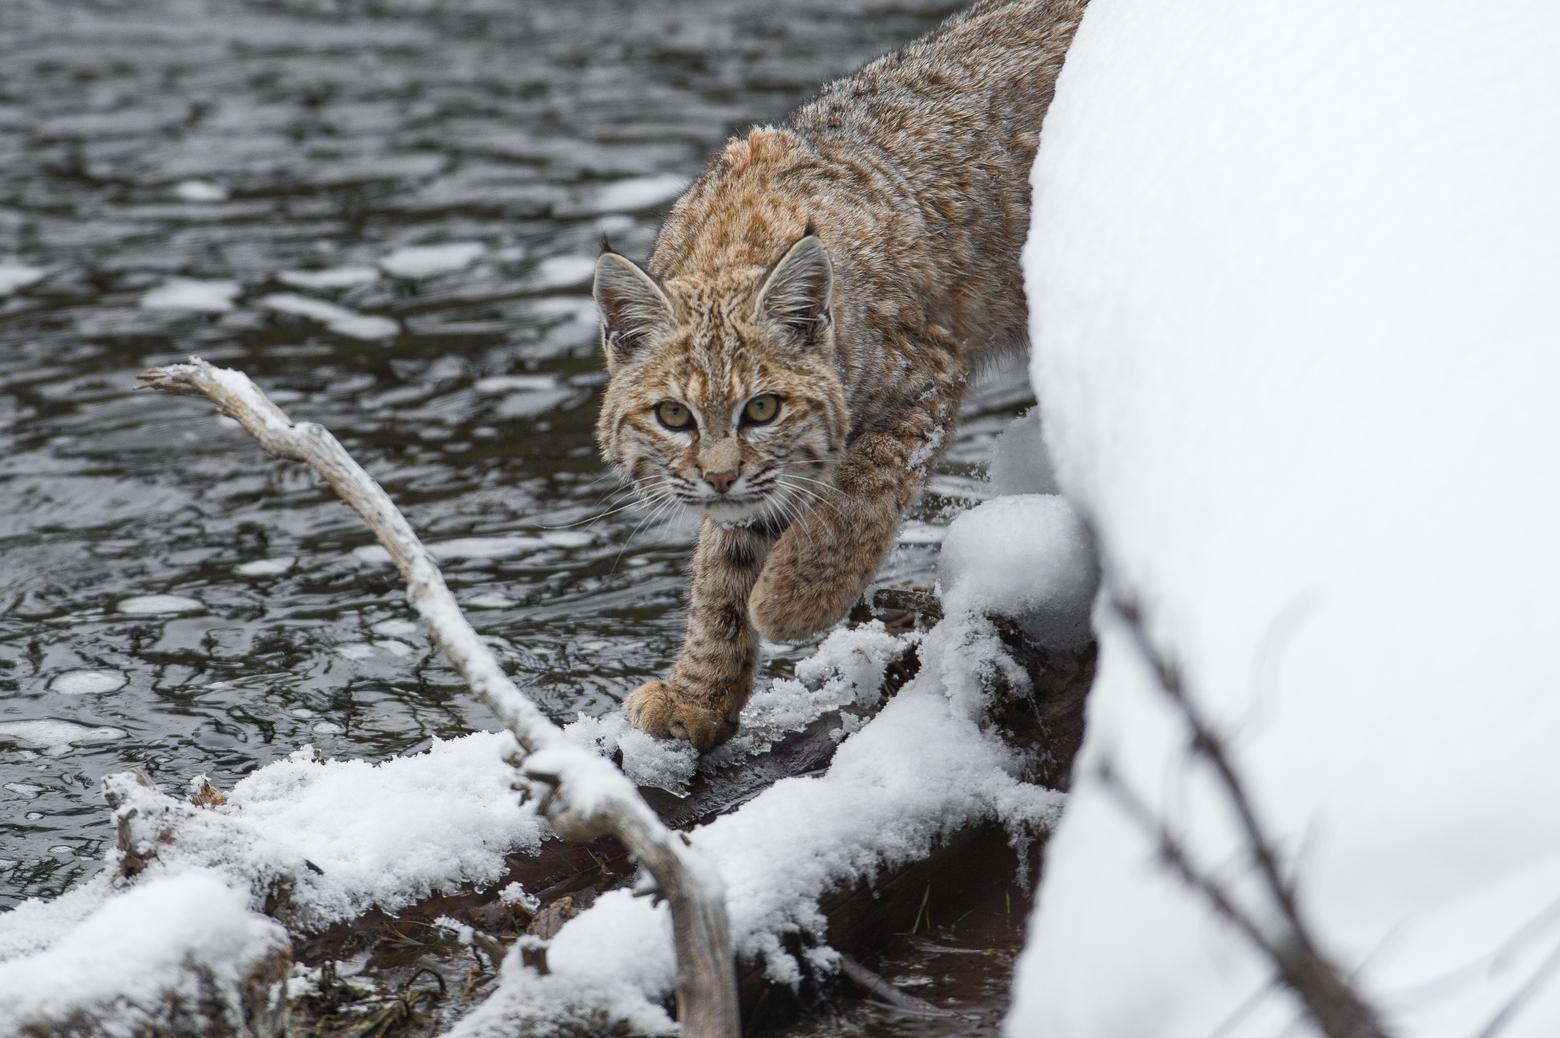 This is the Yellowstone bobcat whose economic impact Mark Elbroch, Lisa Robertson and colleagues assessed. This lone wildcat, in a single year, was responsible for an estimated $308,000 in economic activity owed to what wildlife photographers and others were willing to pay to go view it. Photo courtesy Neal Herbert/NPS